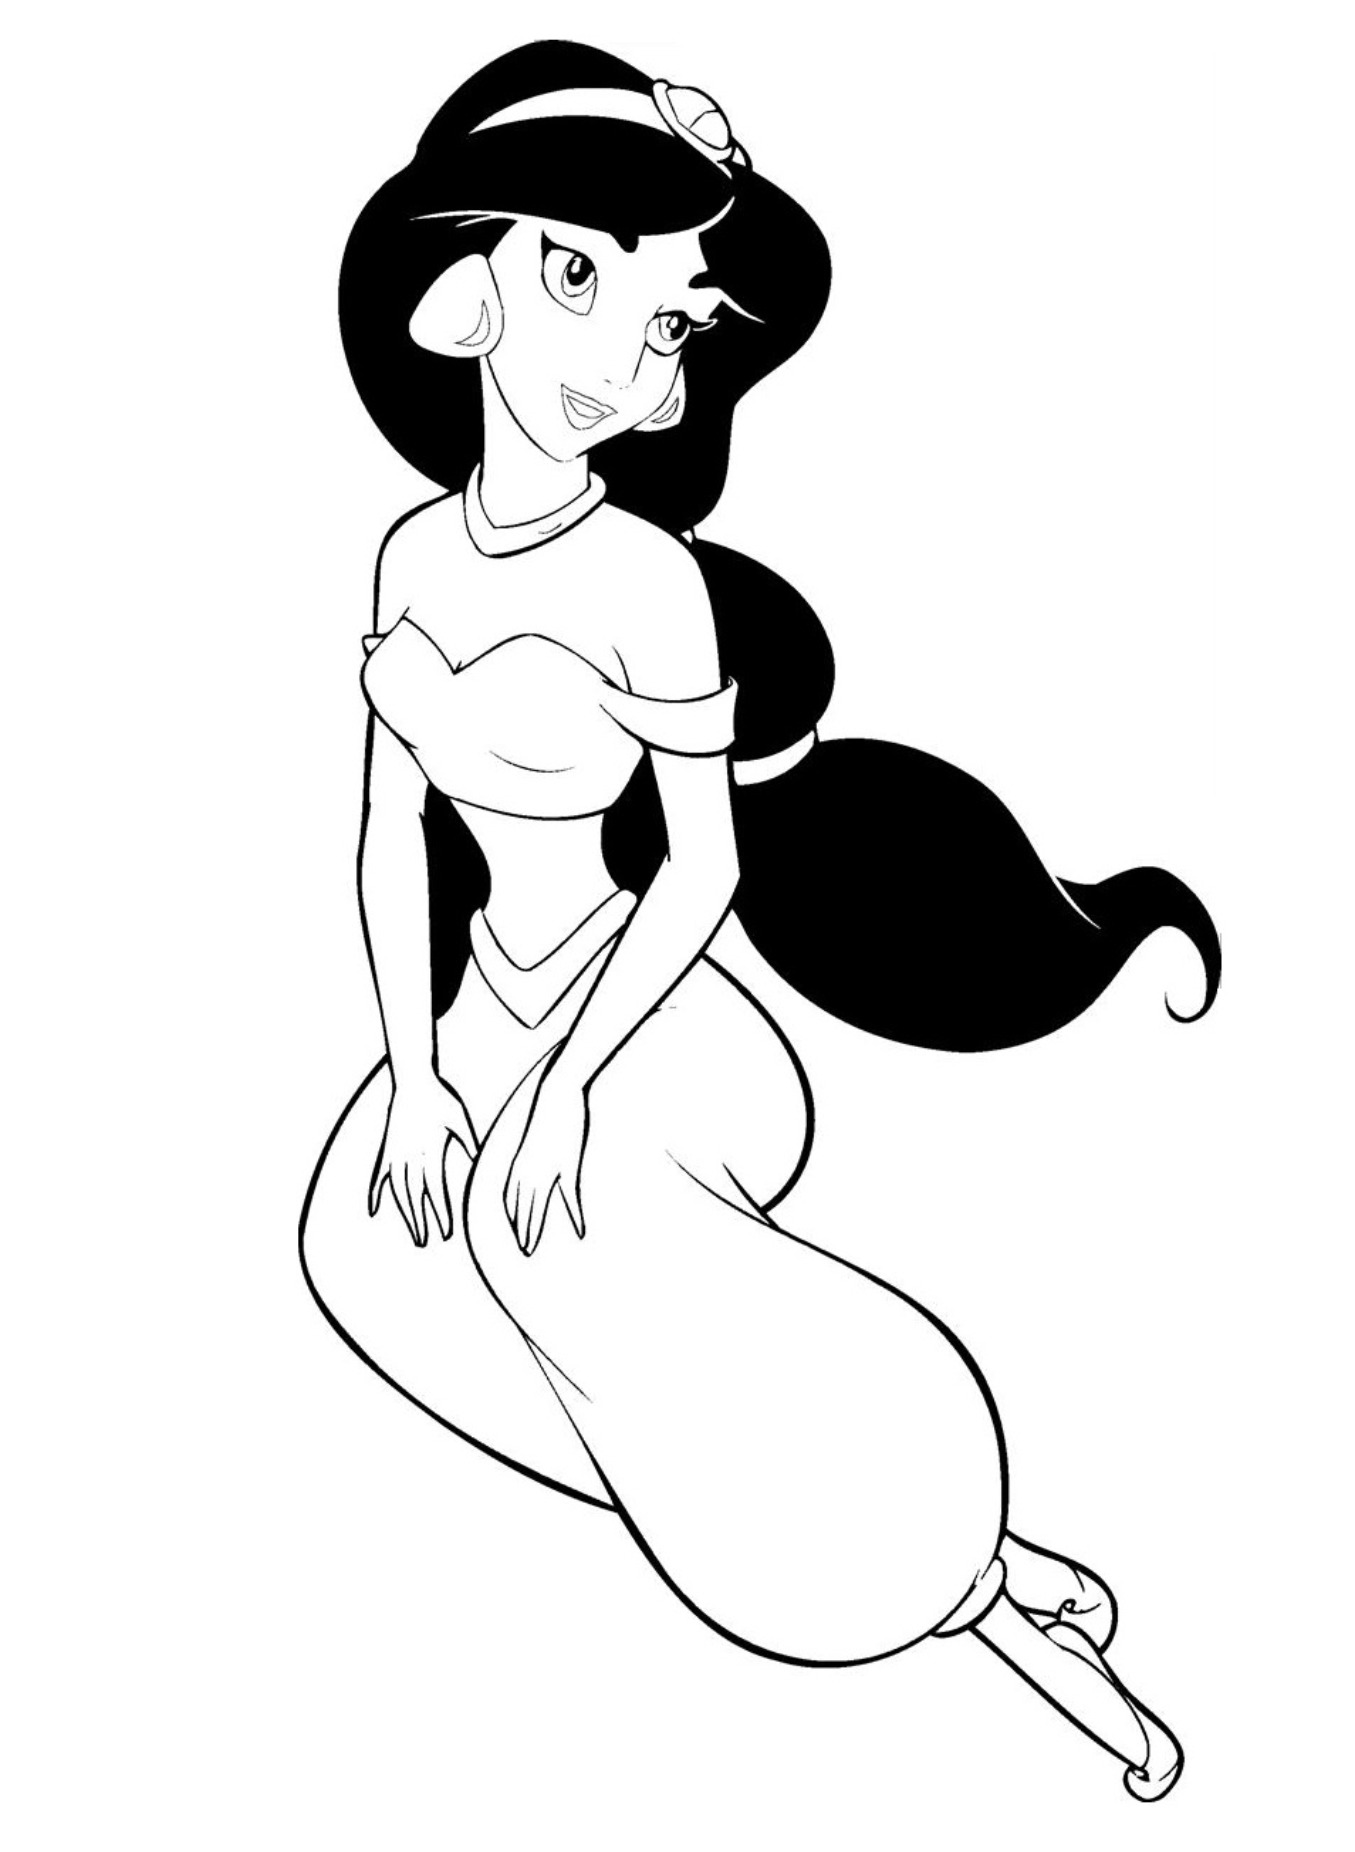 Printable Lovely Princess Jasmine Coloring Page for kids.